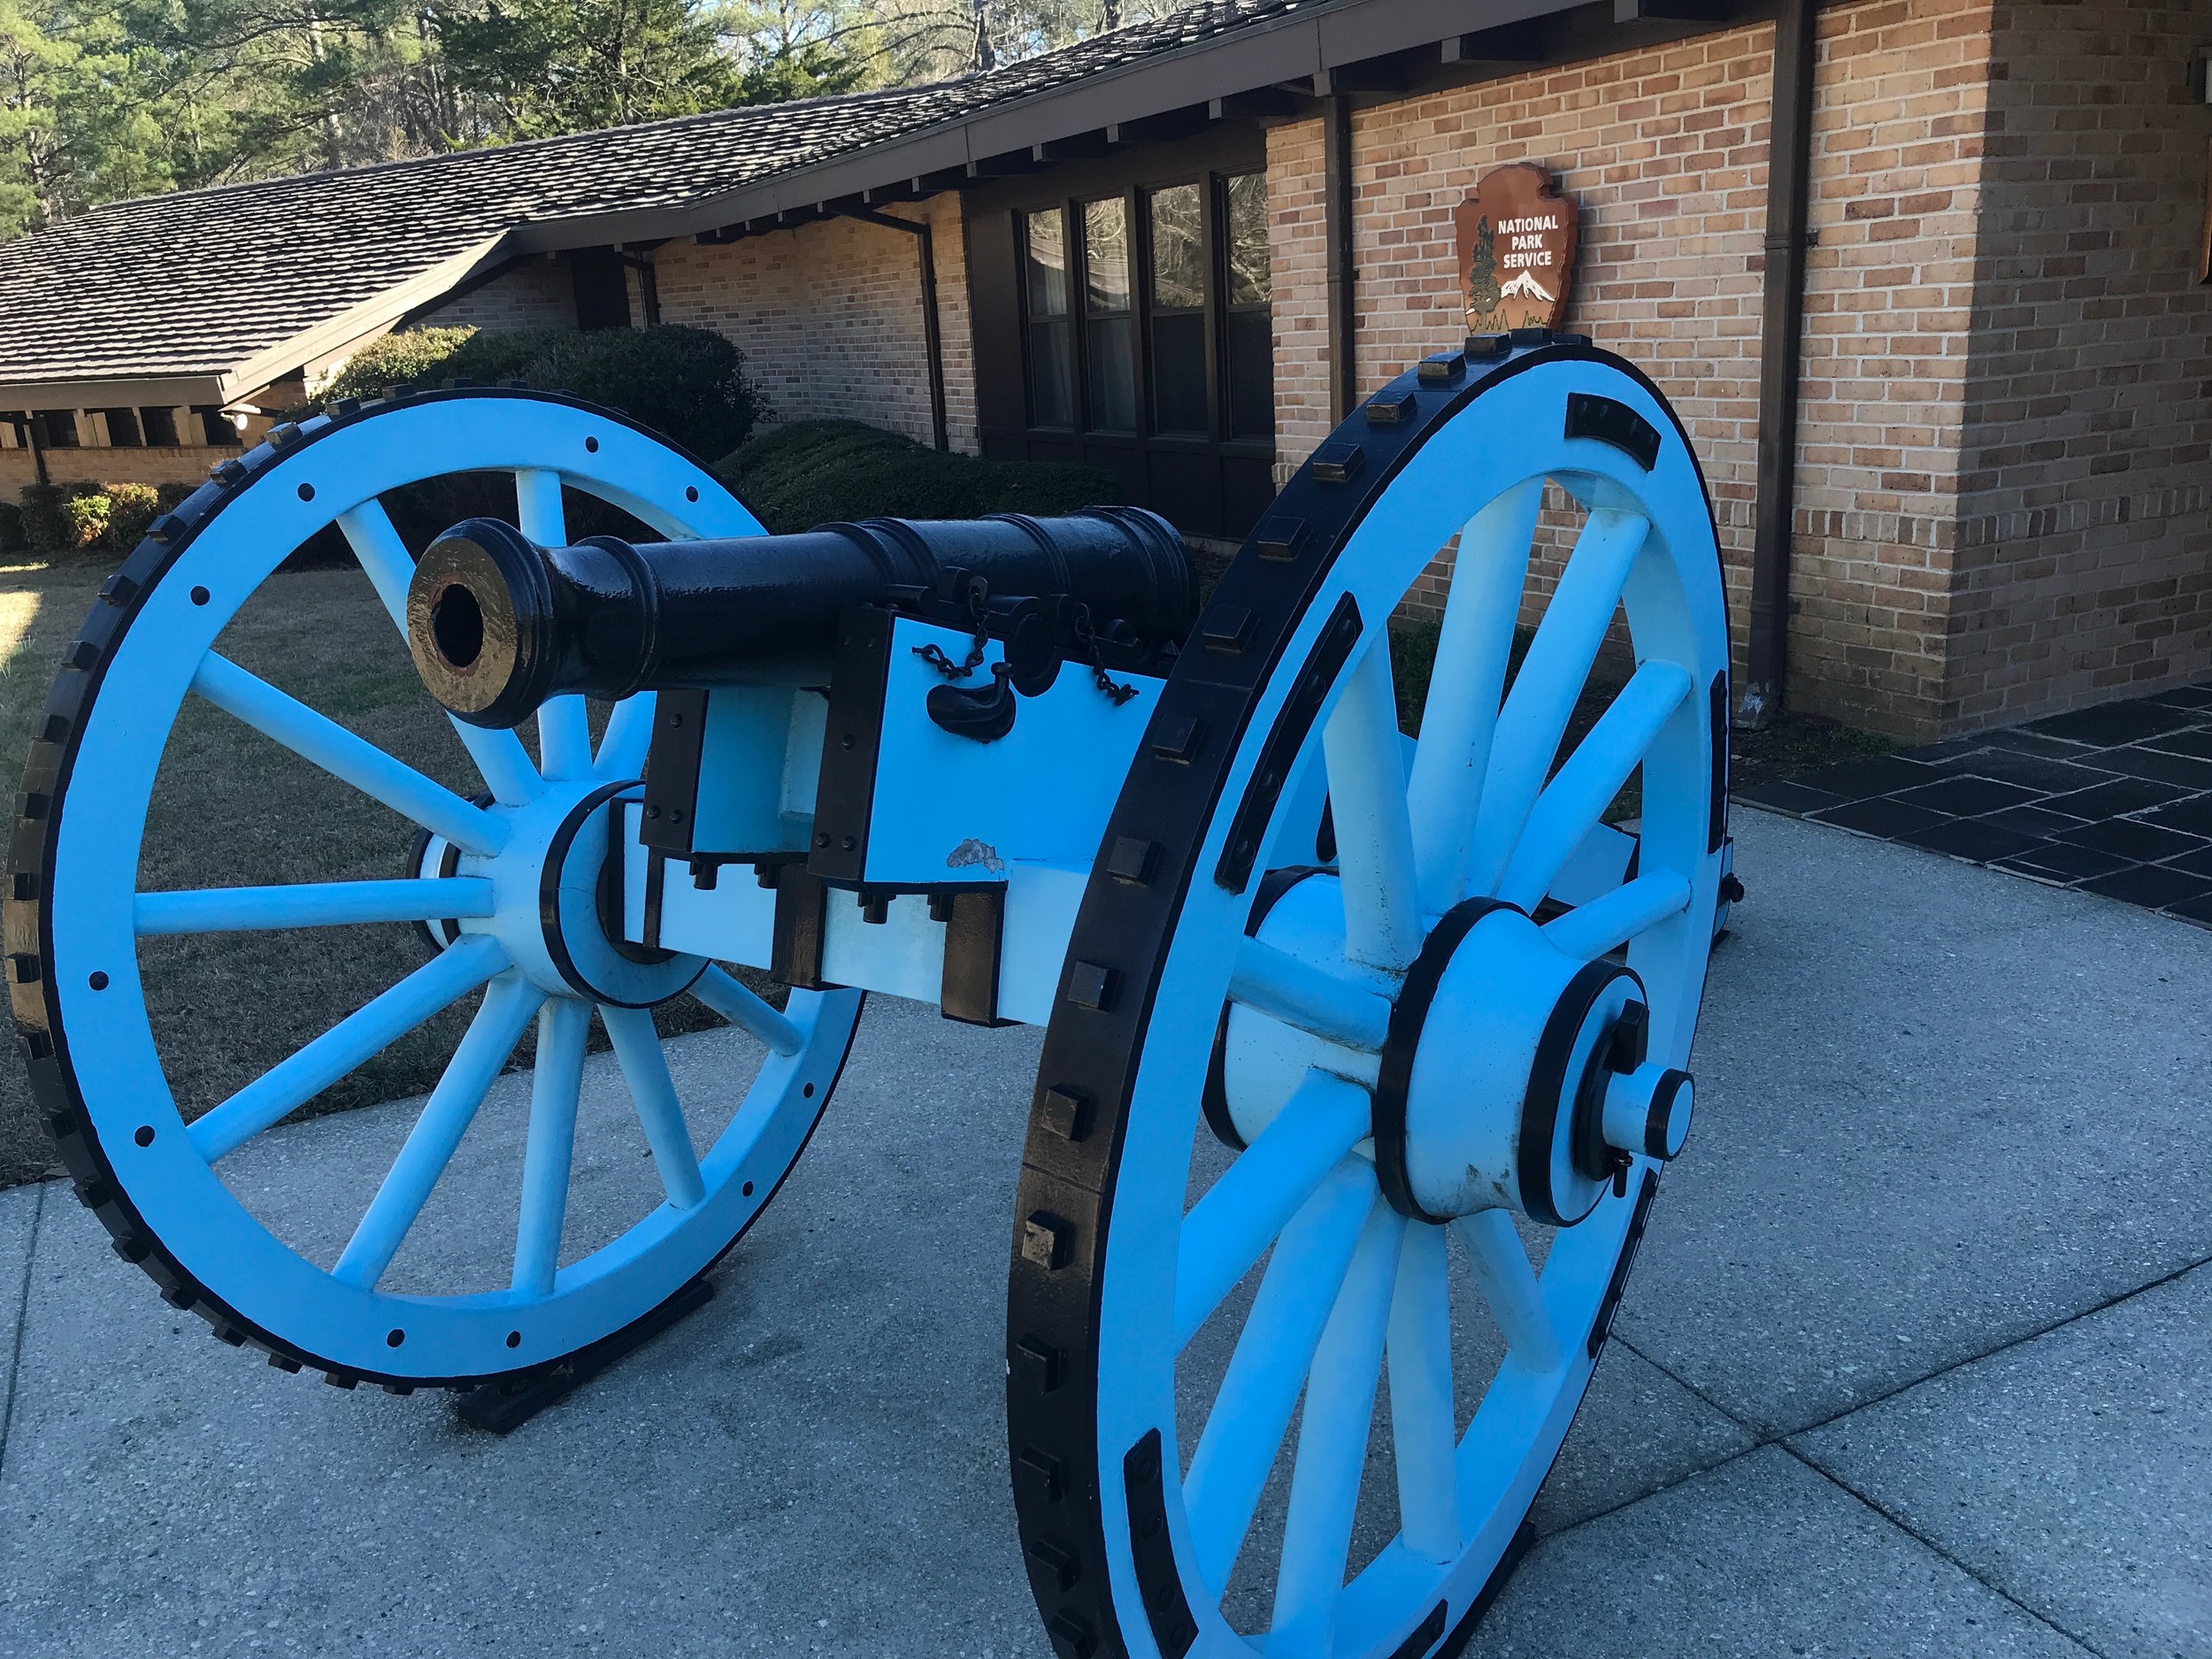  A cannon like those used by Americans is on display at the Horseshoe Bend National Military Park. Influenced by France, a sign nearby explains, cannon carriages were painted light blue between the American Revolution and the Civil War.      